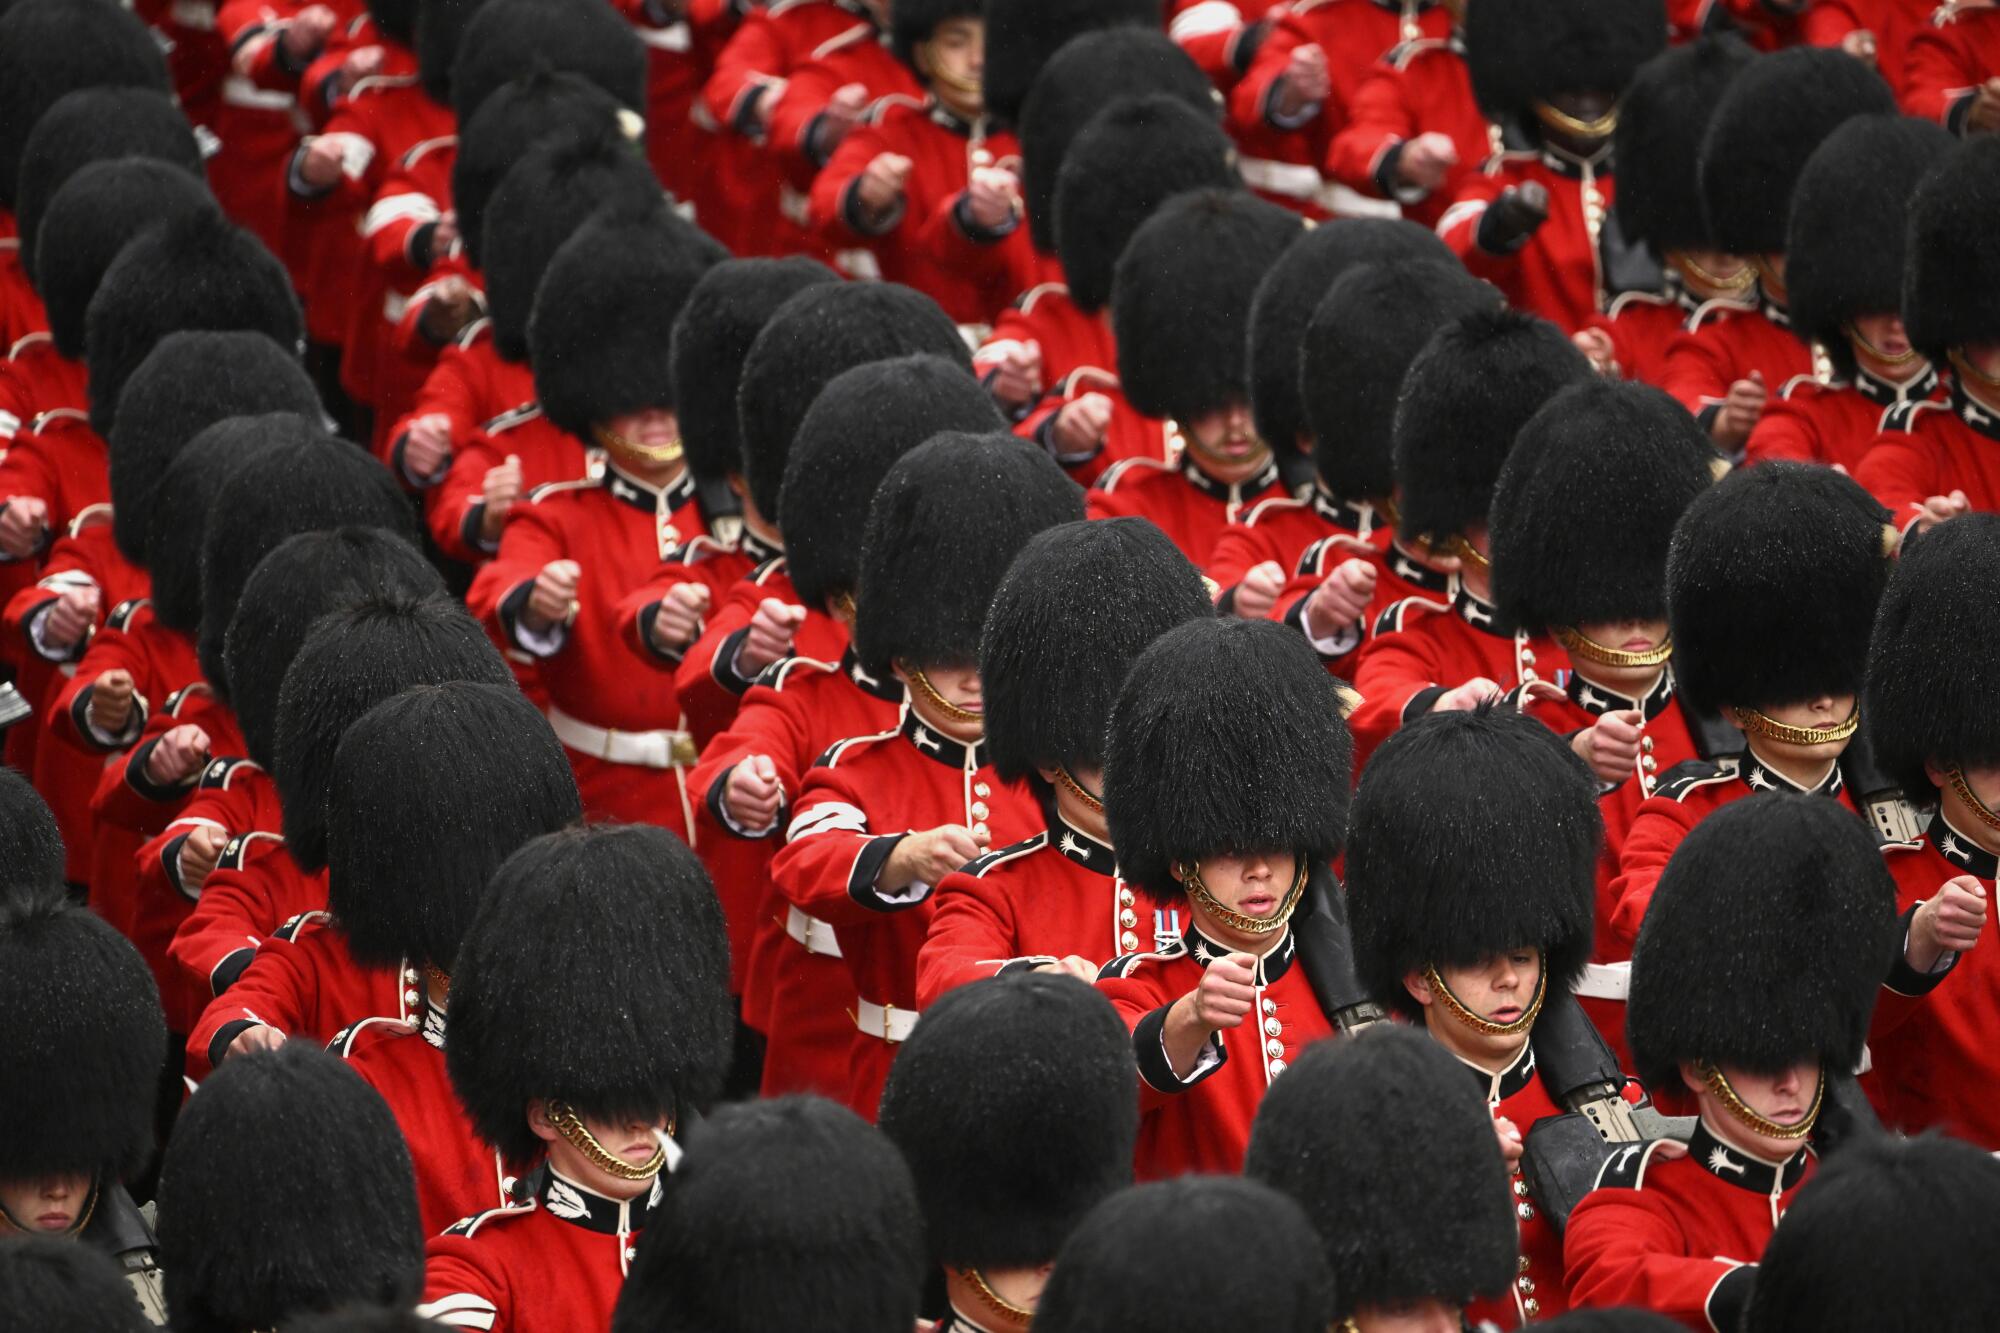 Scots and Welsh Guards march on the procession route in dense formation.